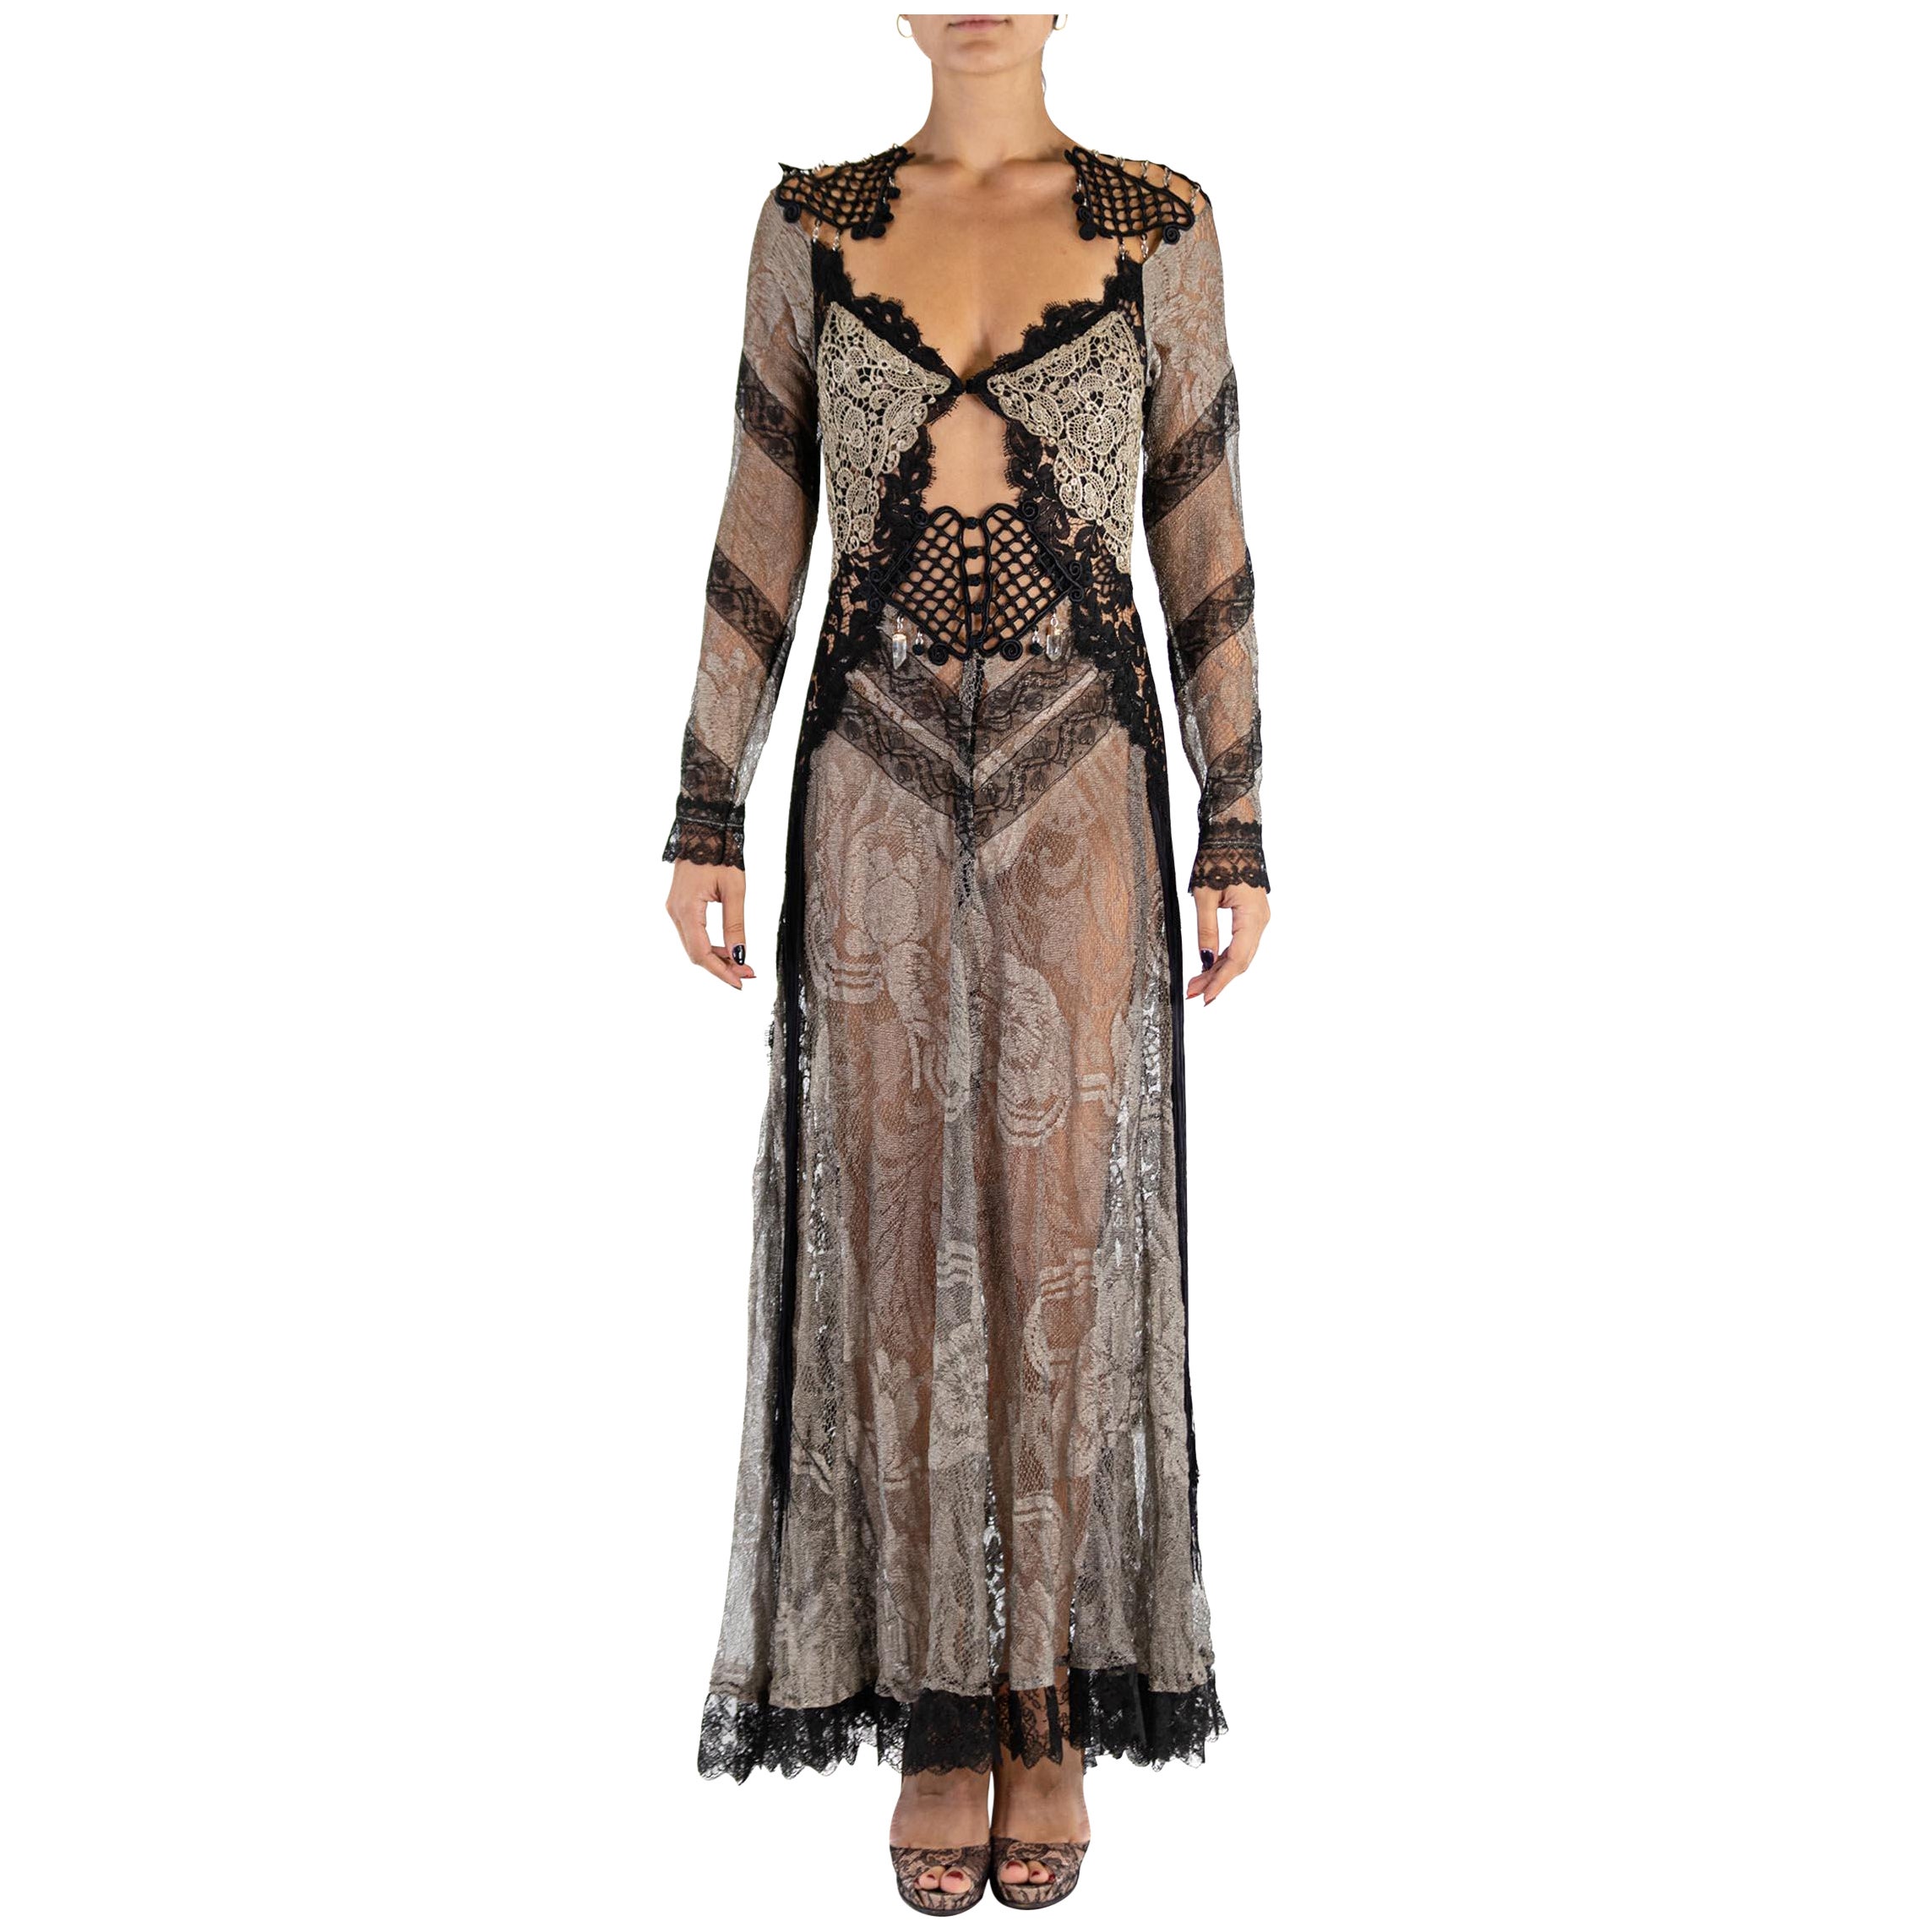 MORPHEW ATELIER Black & Silver Antique Lace Sleeved Gown With Quartz Crystals For Sale